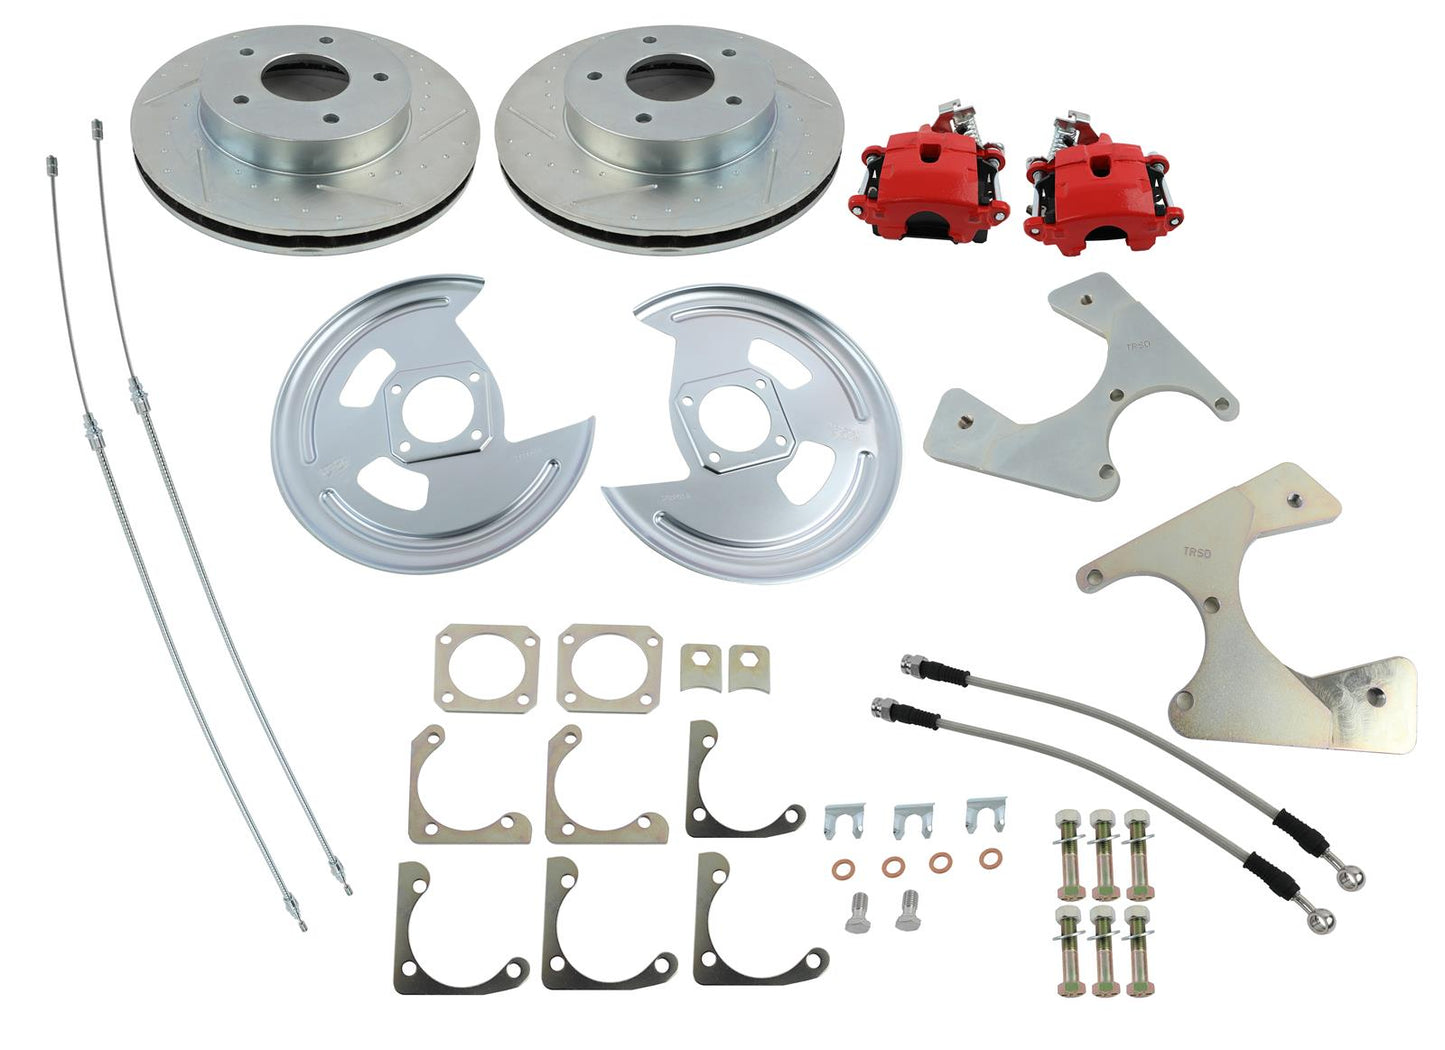 Right Stuff Detailing Rear Disc Brake Conversion Kits AFXRD01Z for 1966-1977 Buick, Chevy, Oldsmobile, Pontiac